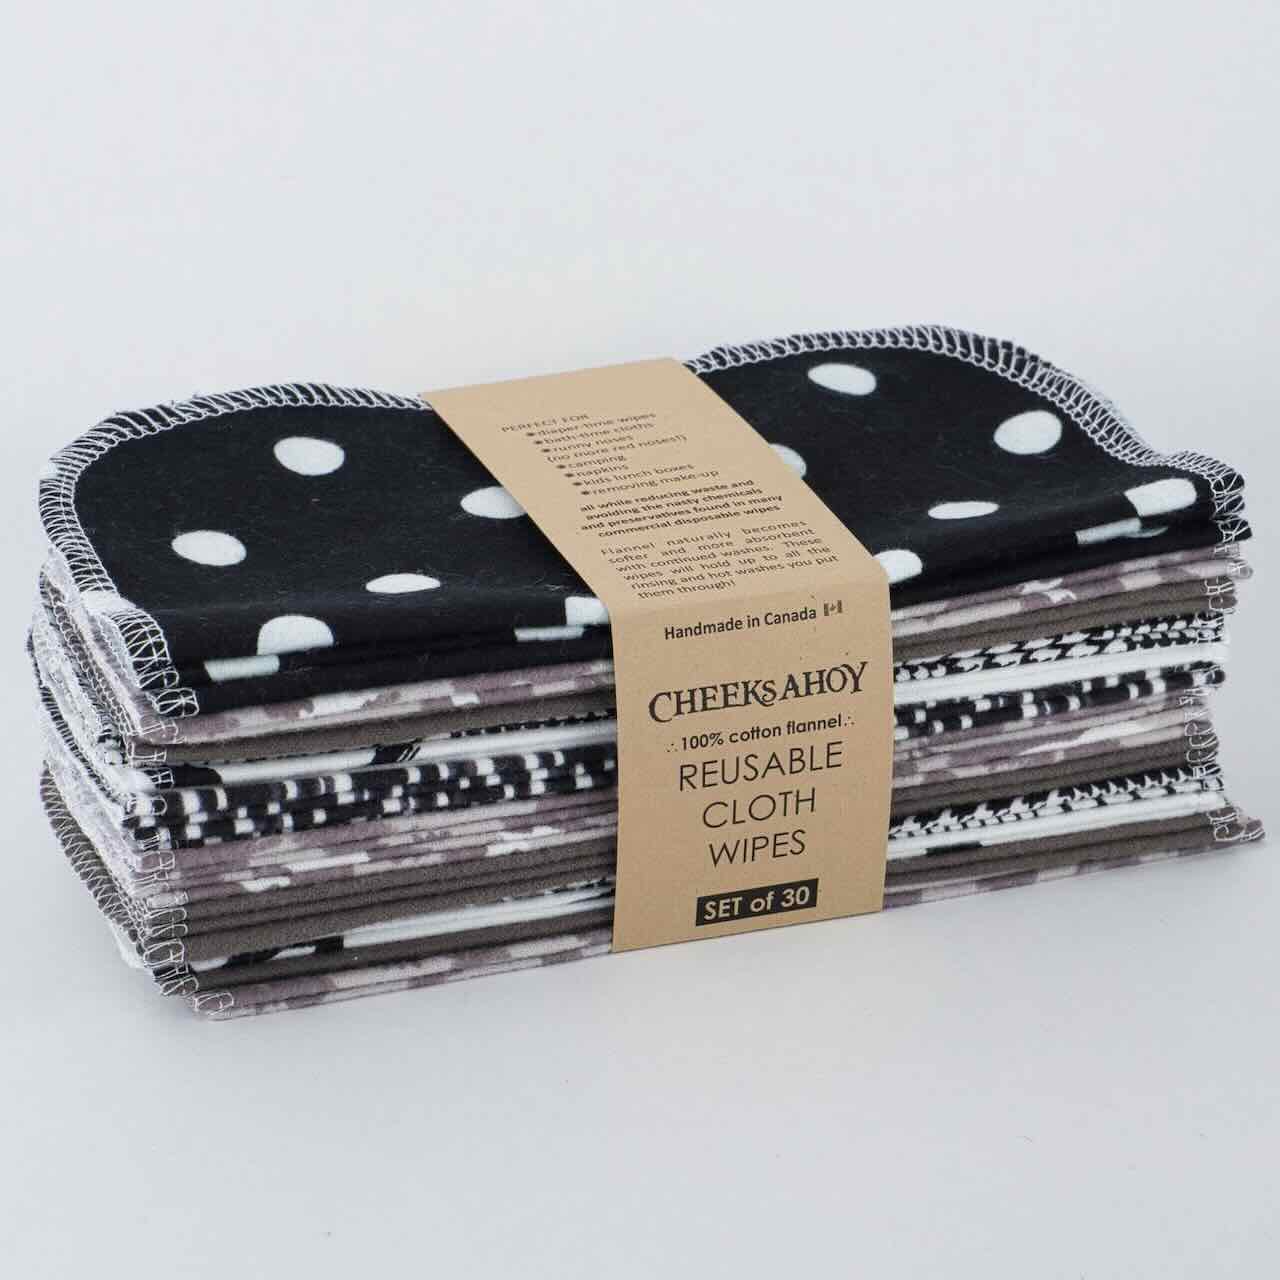 Monochrome patterned cheeks ahoy cloth wipes, set of 30 in its paper sleeve packaging, in a white background drop.